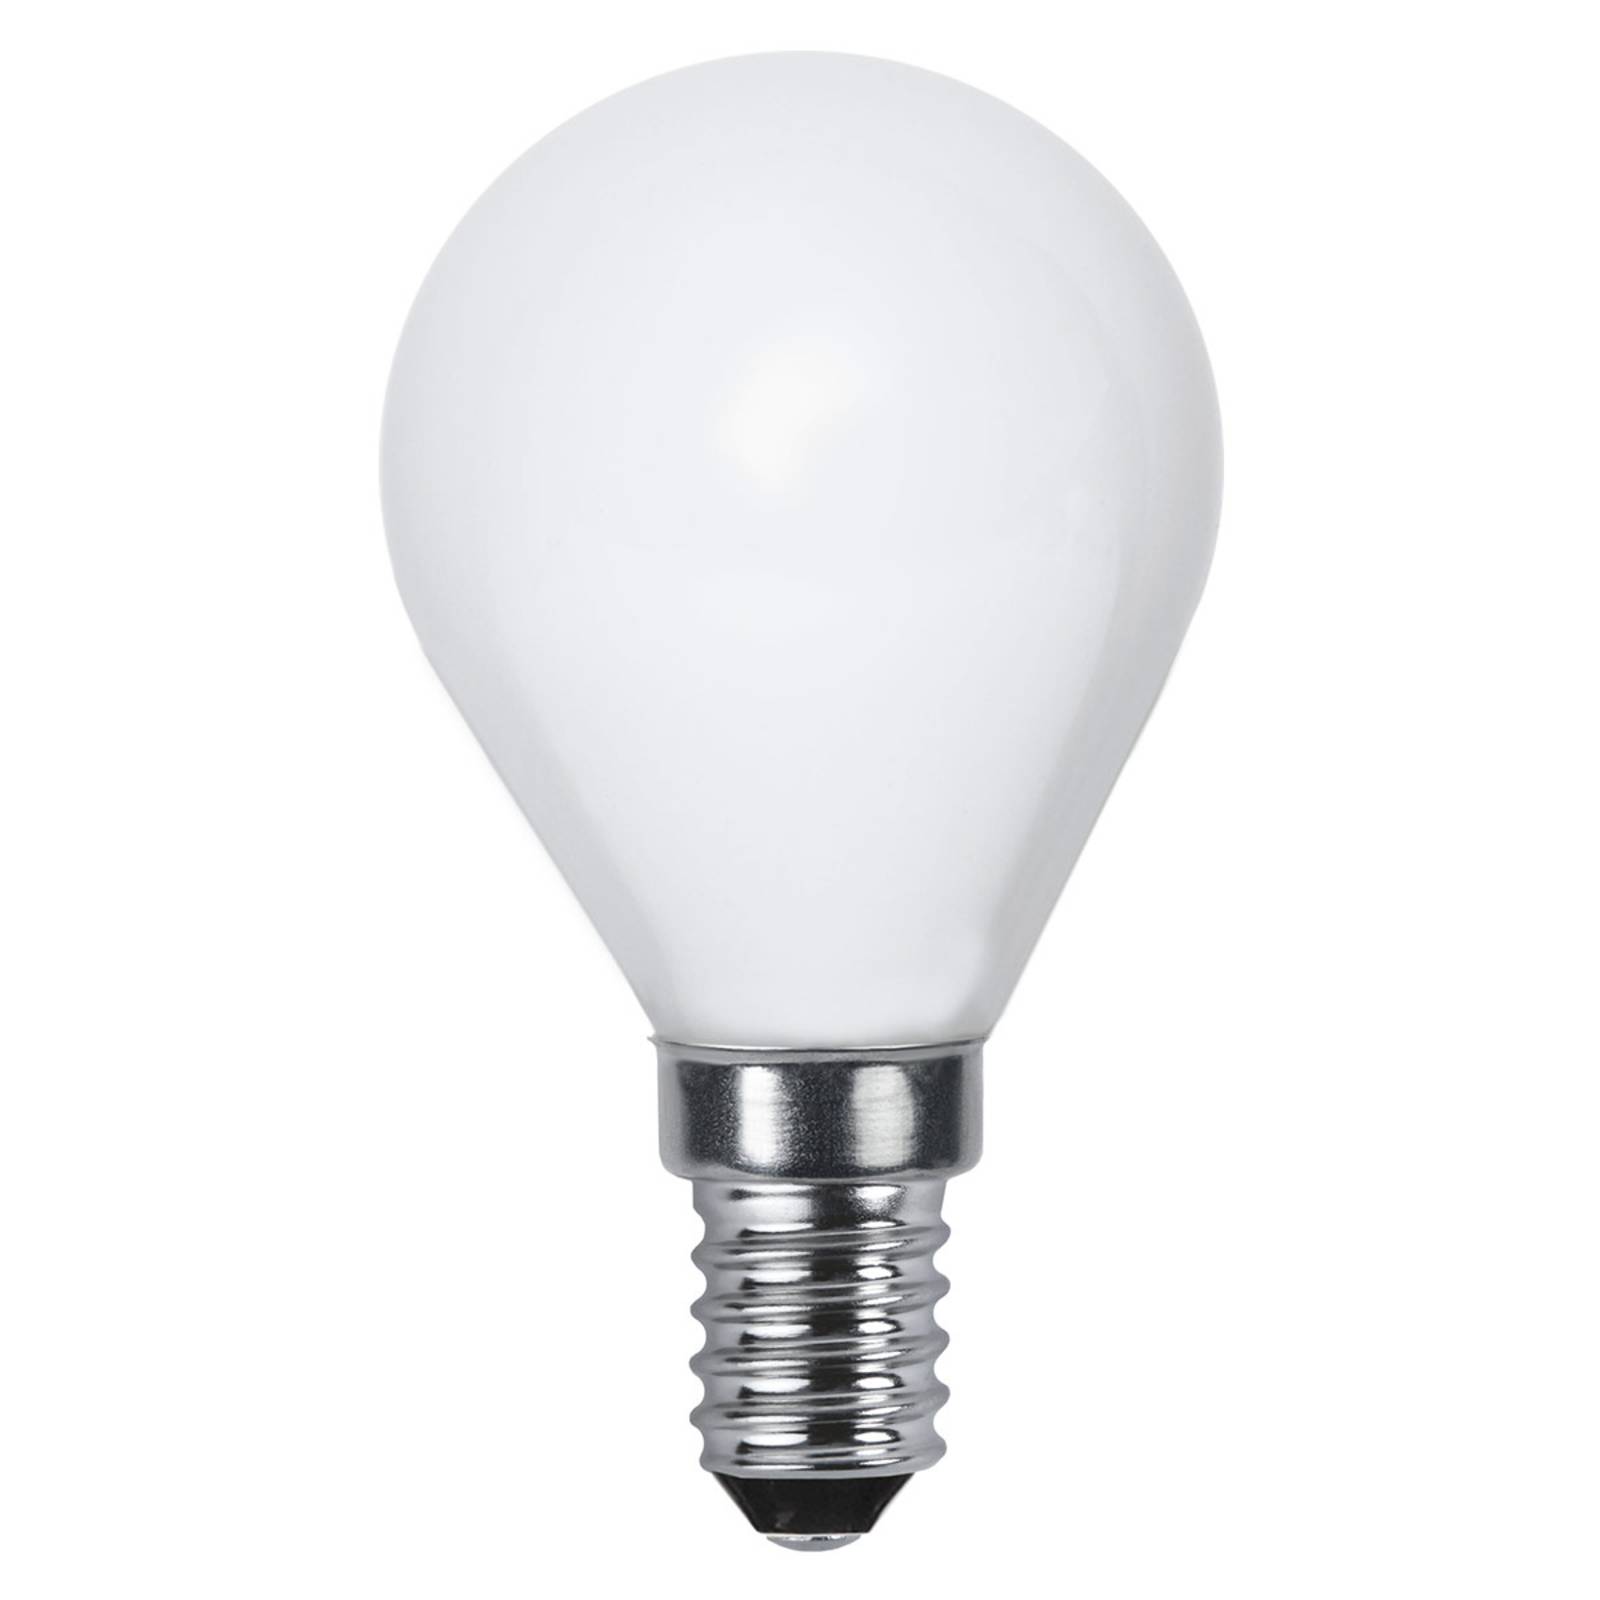 Image of STAR TRADING Ampoule goutte LED E14 2 700 K opale Ra90 4,7 W 7391482036018